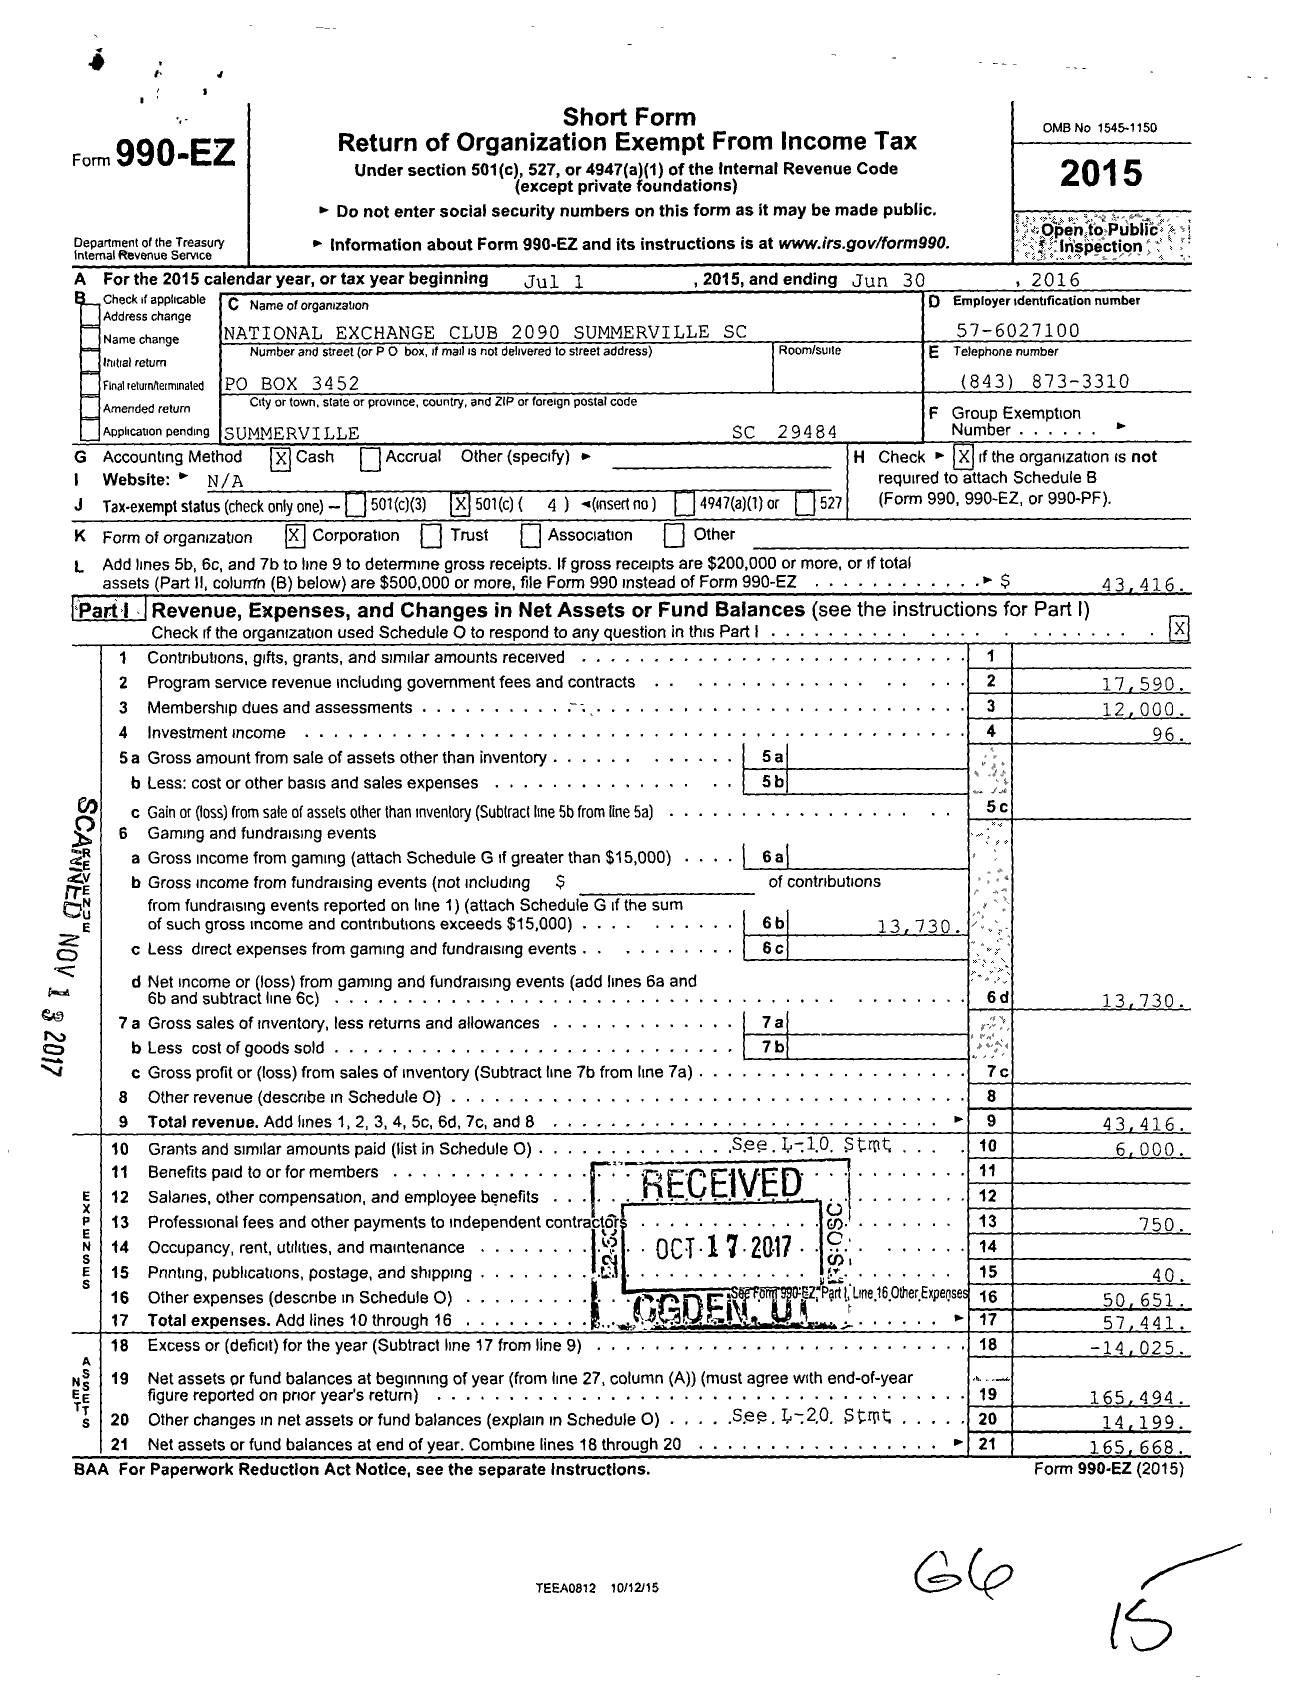 Image of first page of 2015 Form 990EO for National Exchange Club 2090 Summerville SC